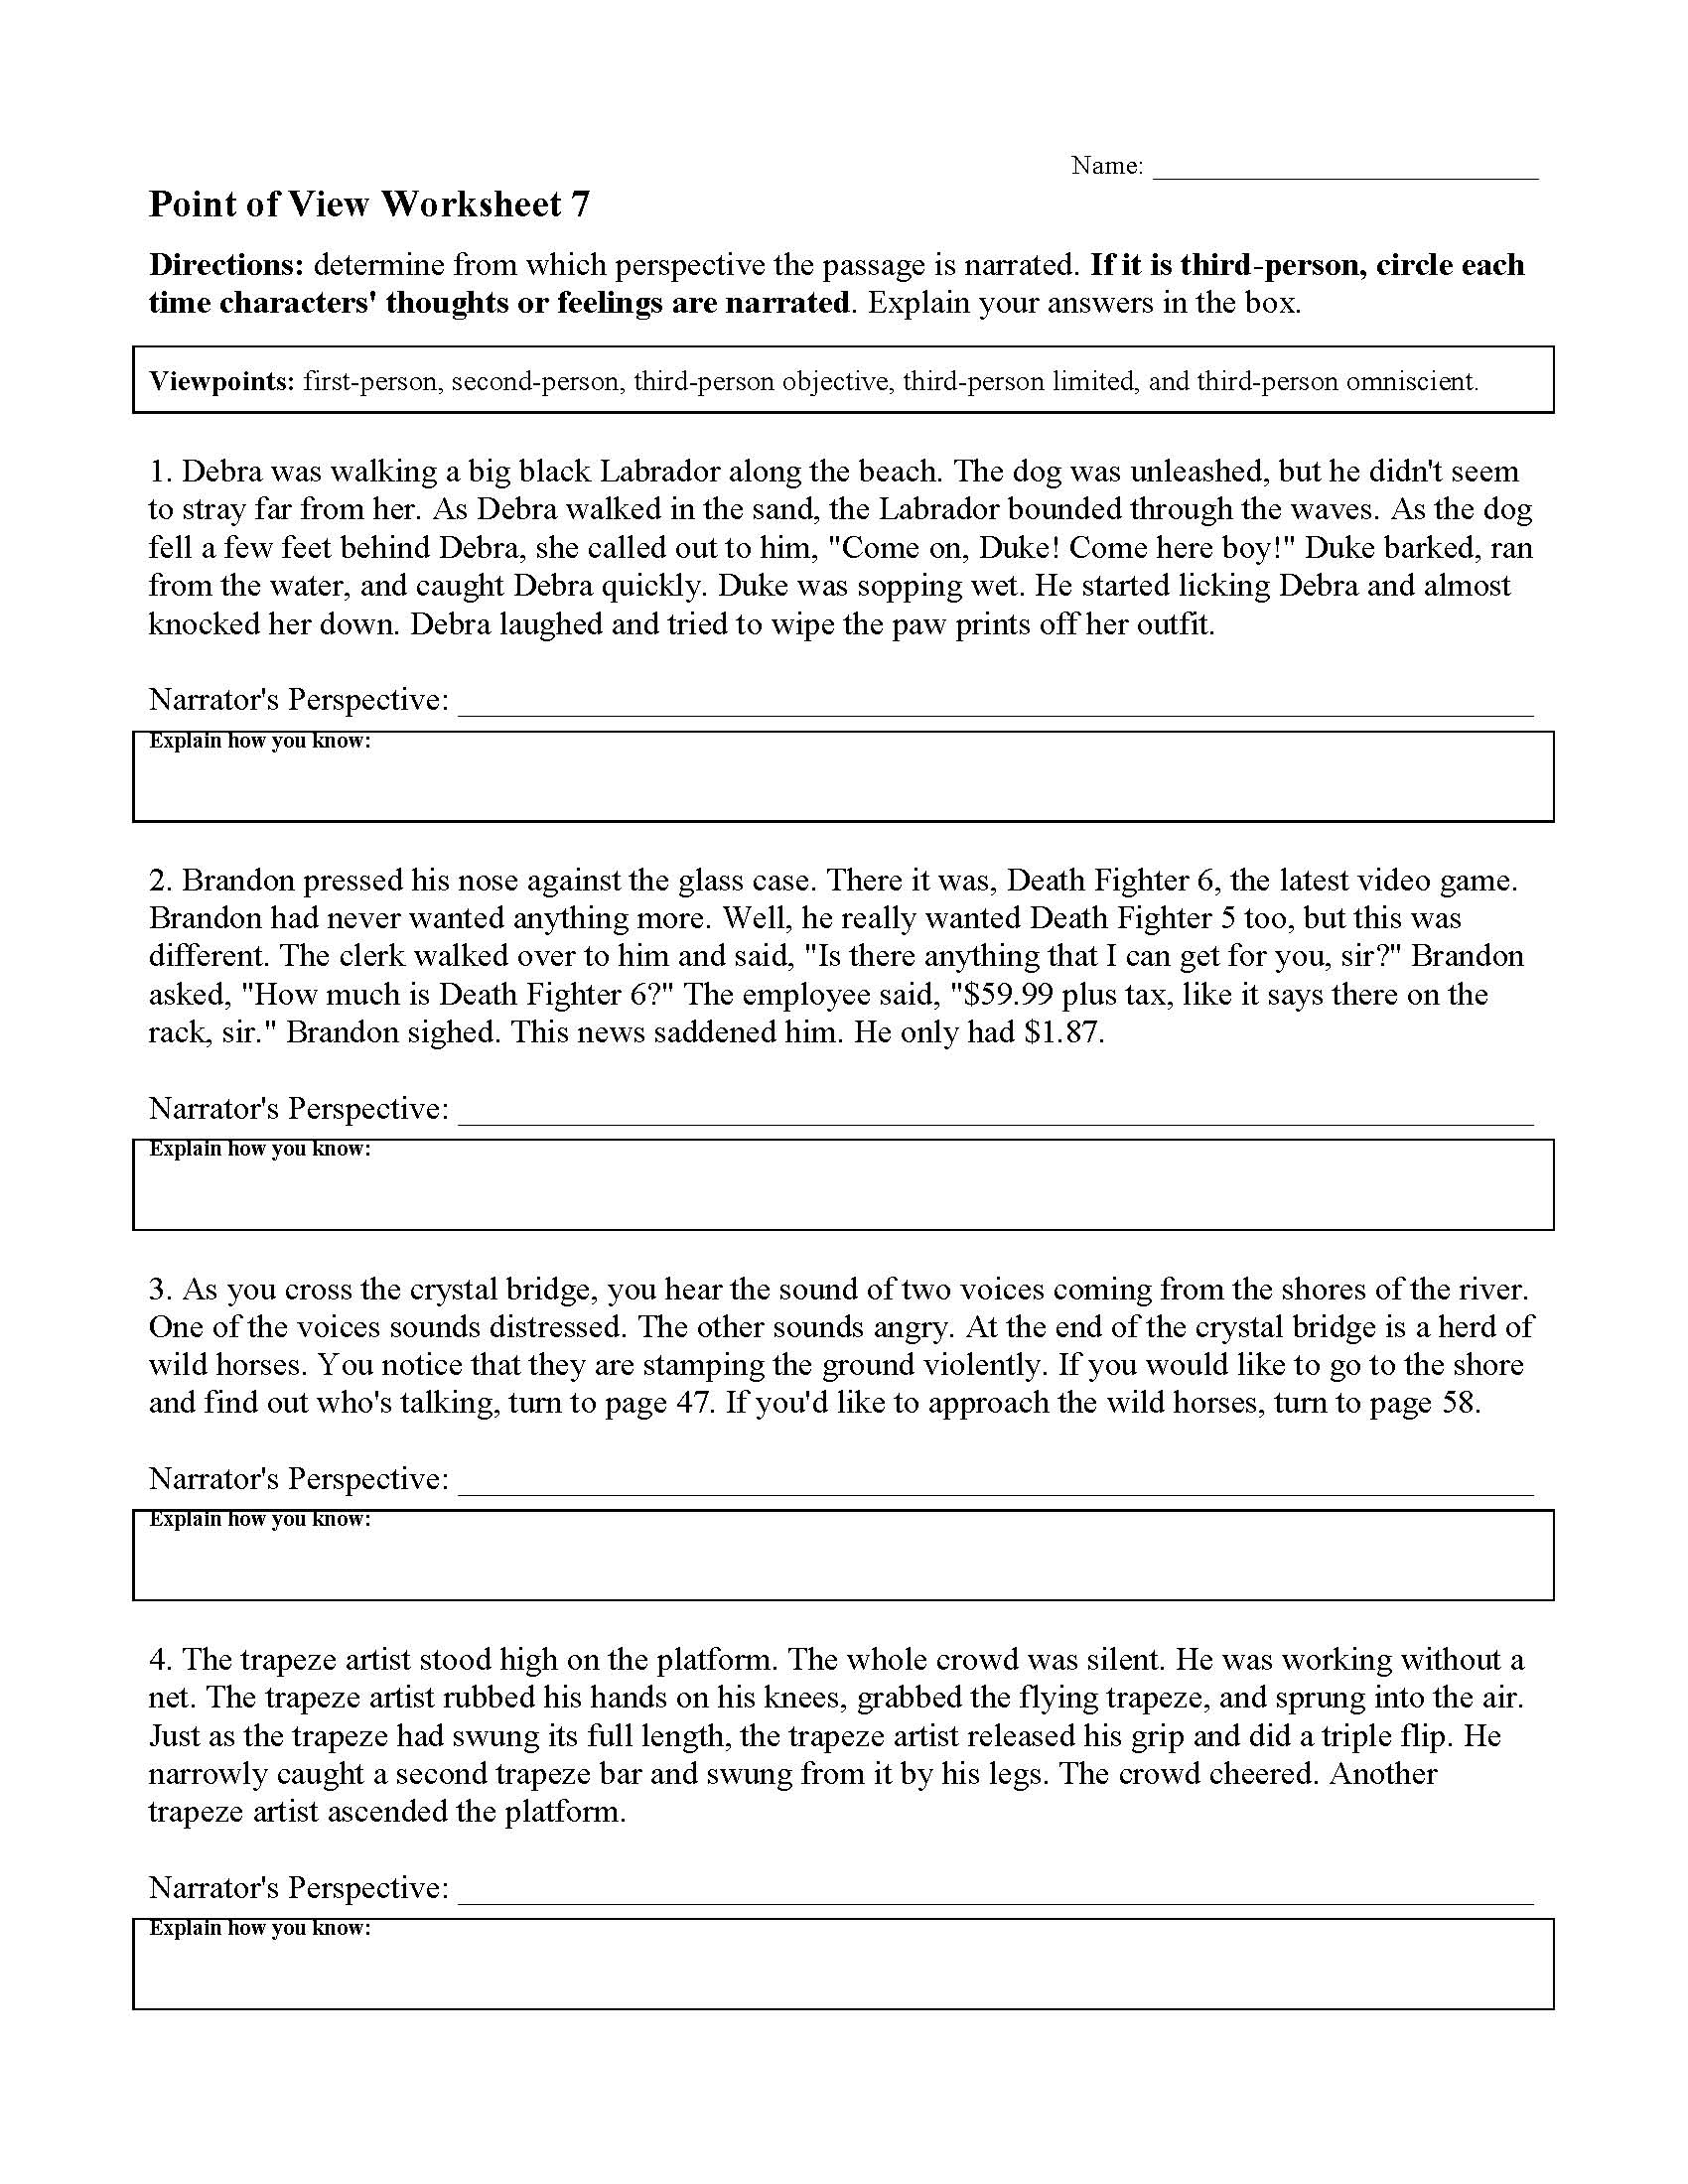 This is a preview image of Point of View Worksheet 7. Click on it to enlarge it or view the source file.